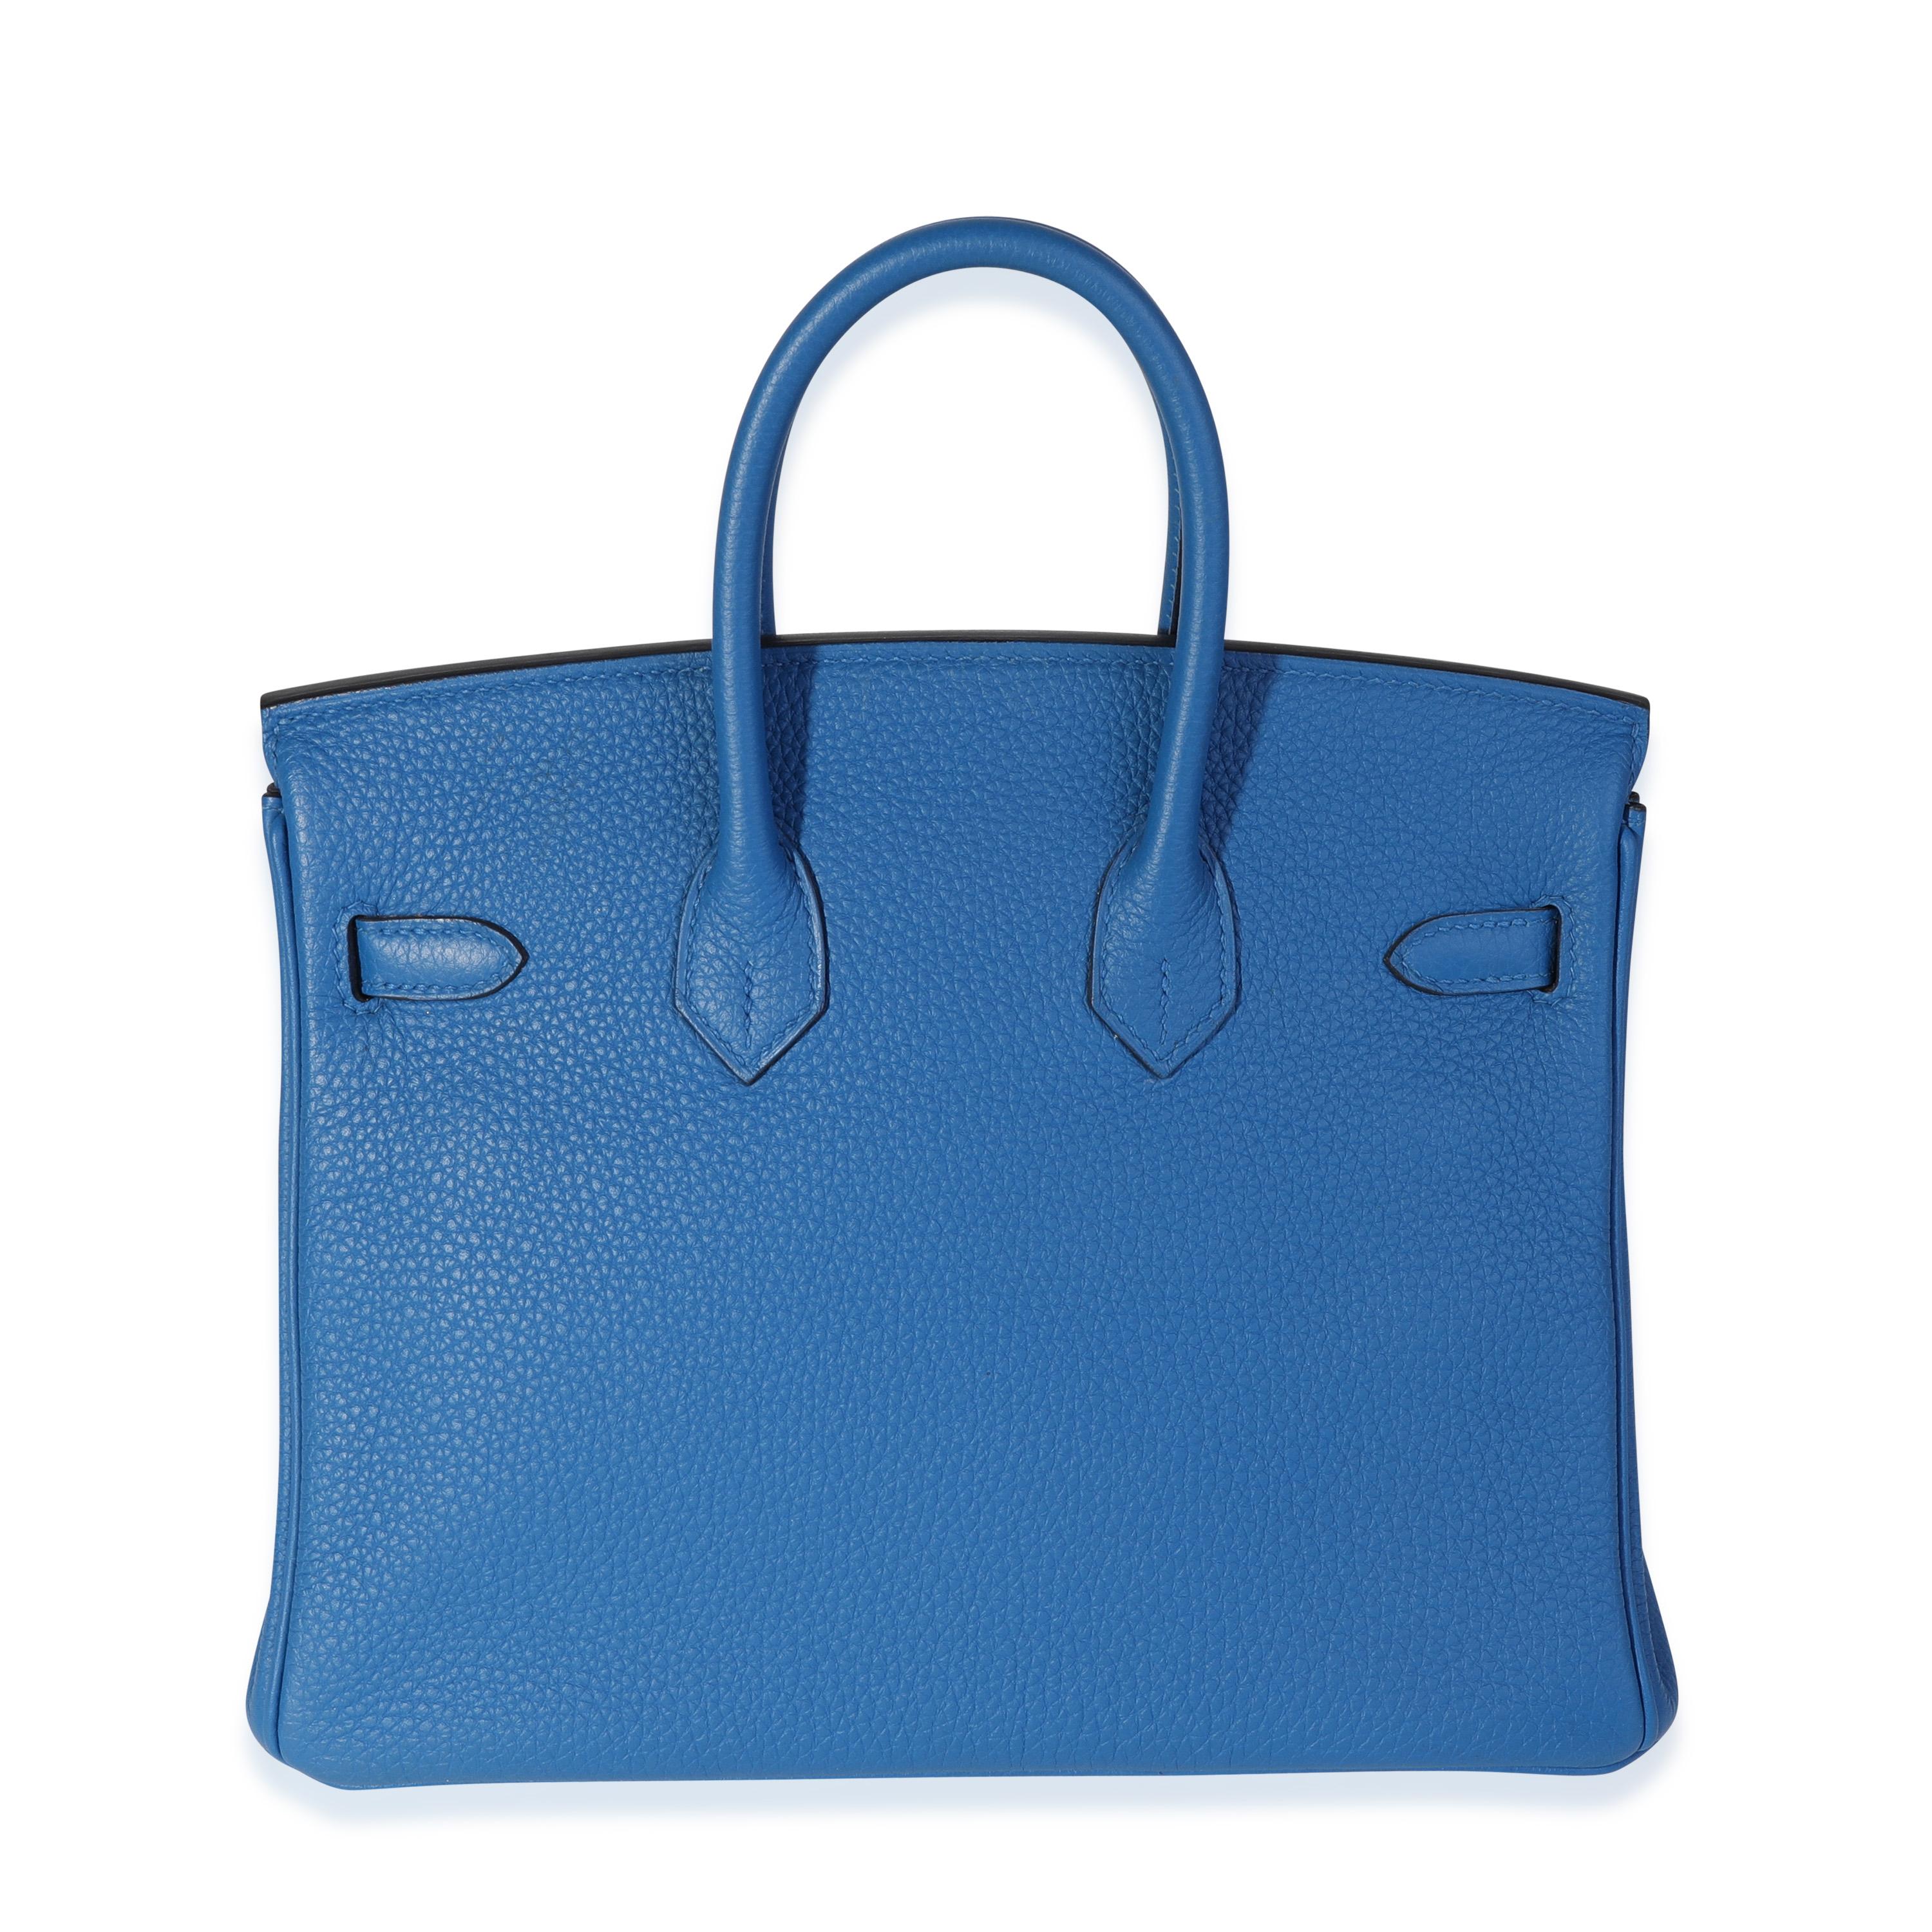 Listing Title: Hermès Bleu Hydra Clémence Birkin 25 GHW
SKU: 121359
Condition: Pre-owned 
Handbag Condition: Excellent
Condition Comments: Excellent Condition. Some plastic to hardware. Light Scuffing to corners. No other visible signs of